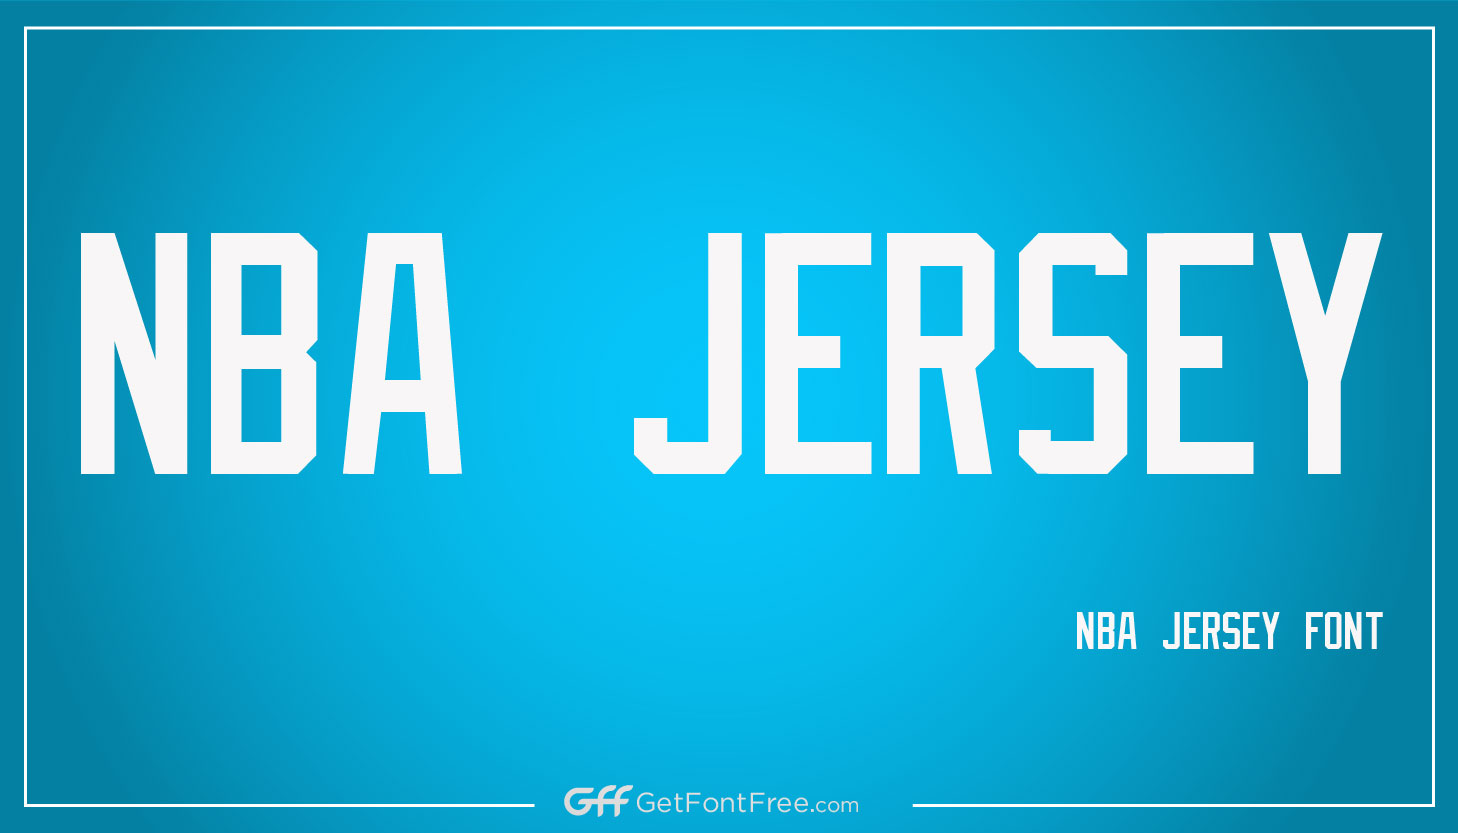 NBA National Basketball Association (NBA) fonts are included in the Nba Jersey Font collection. Nick Whitford and Dennis "LMUpepbander" Ittner were the ones who first came up with the numbers and letters. One of the jersey-related font categories will attract your attention and emerge victorious from the competition. In addition to seeing this list, we suggest looking at a list of the top baseball typefaces.